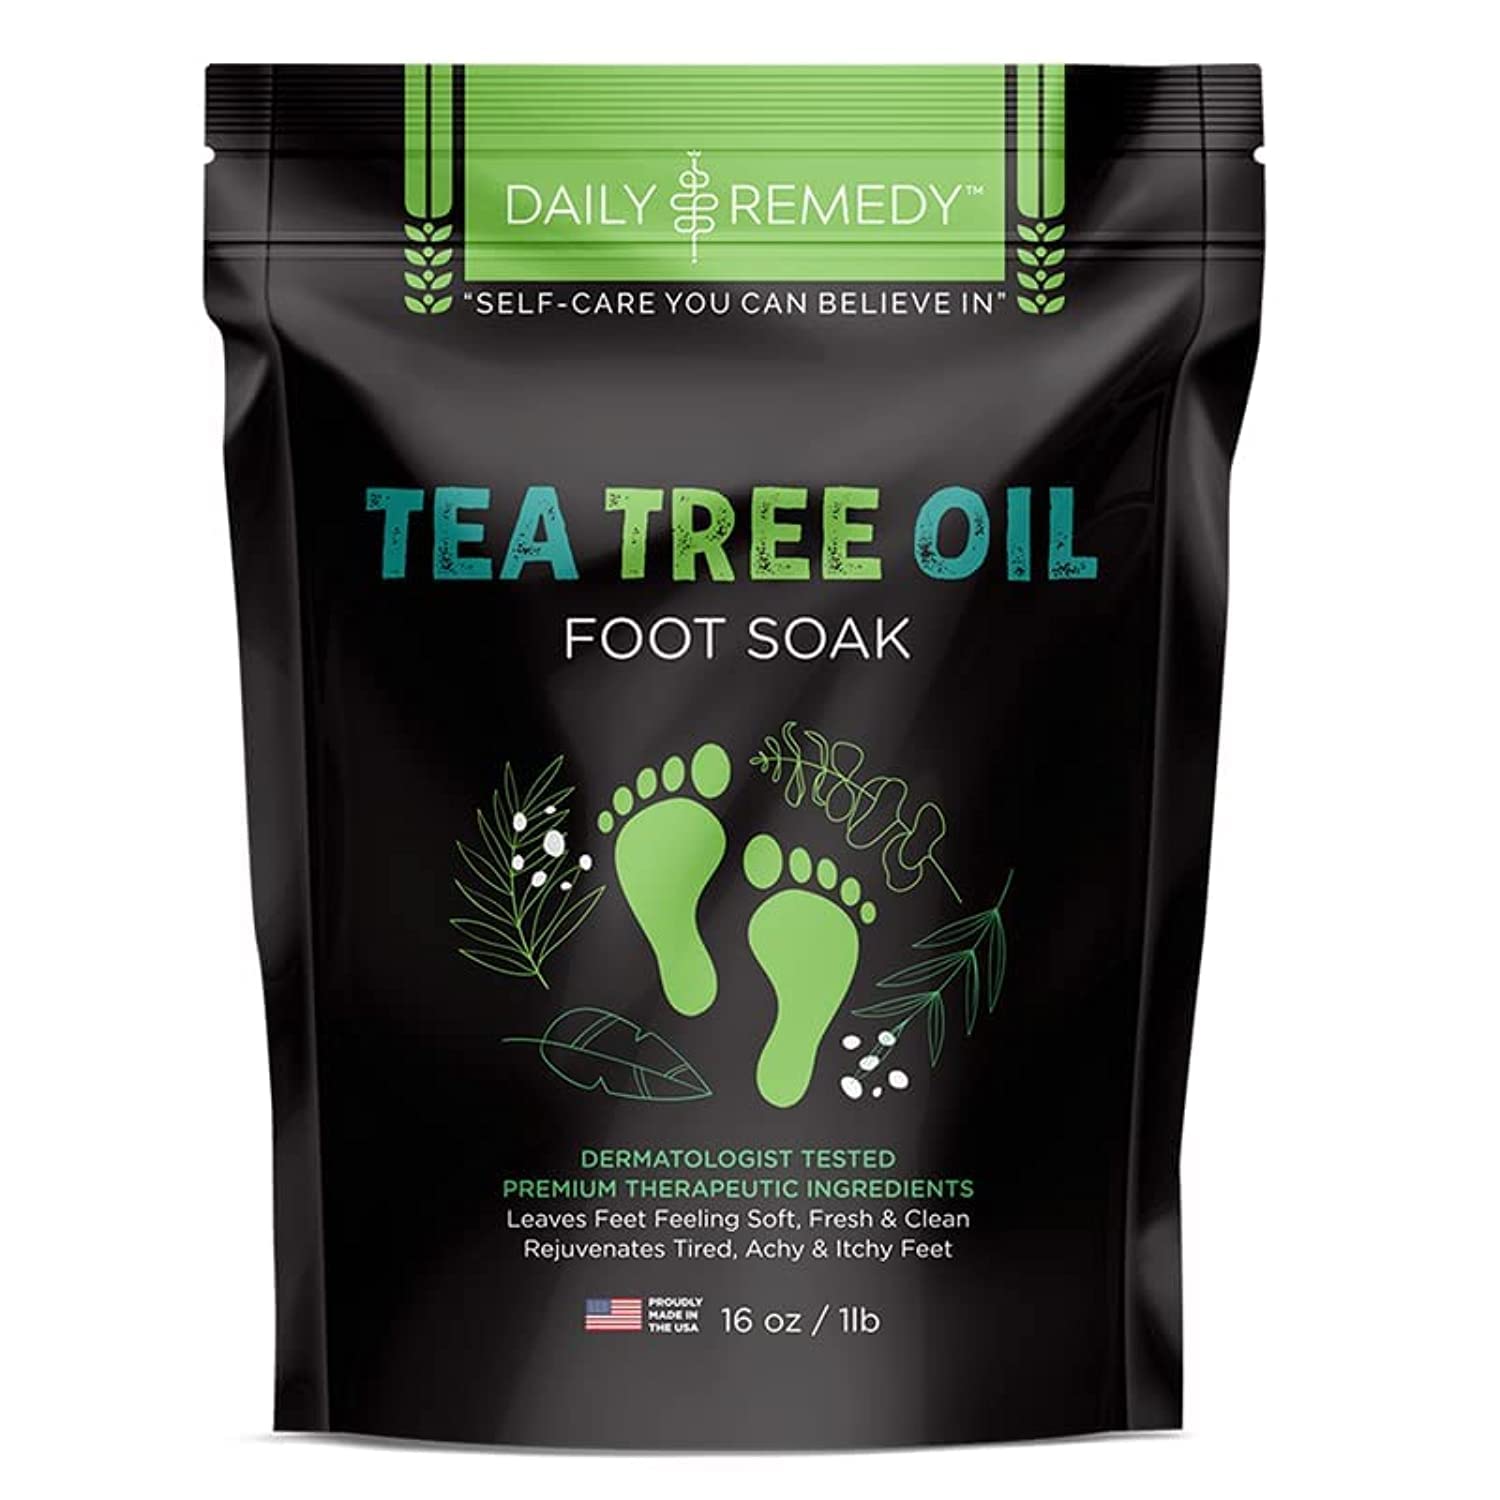 Tea Tree Oil Foot Soak with Epsom Salt - Made in USA - for Toenails, Athlete's Foot, itchy Feet, Stubborn Smelly Foot Odor, Pedicure, Foot Calluses & Soothes Sore Tired Achy Feet - 16